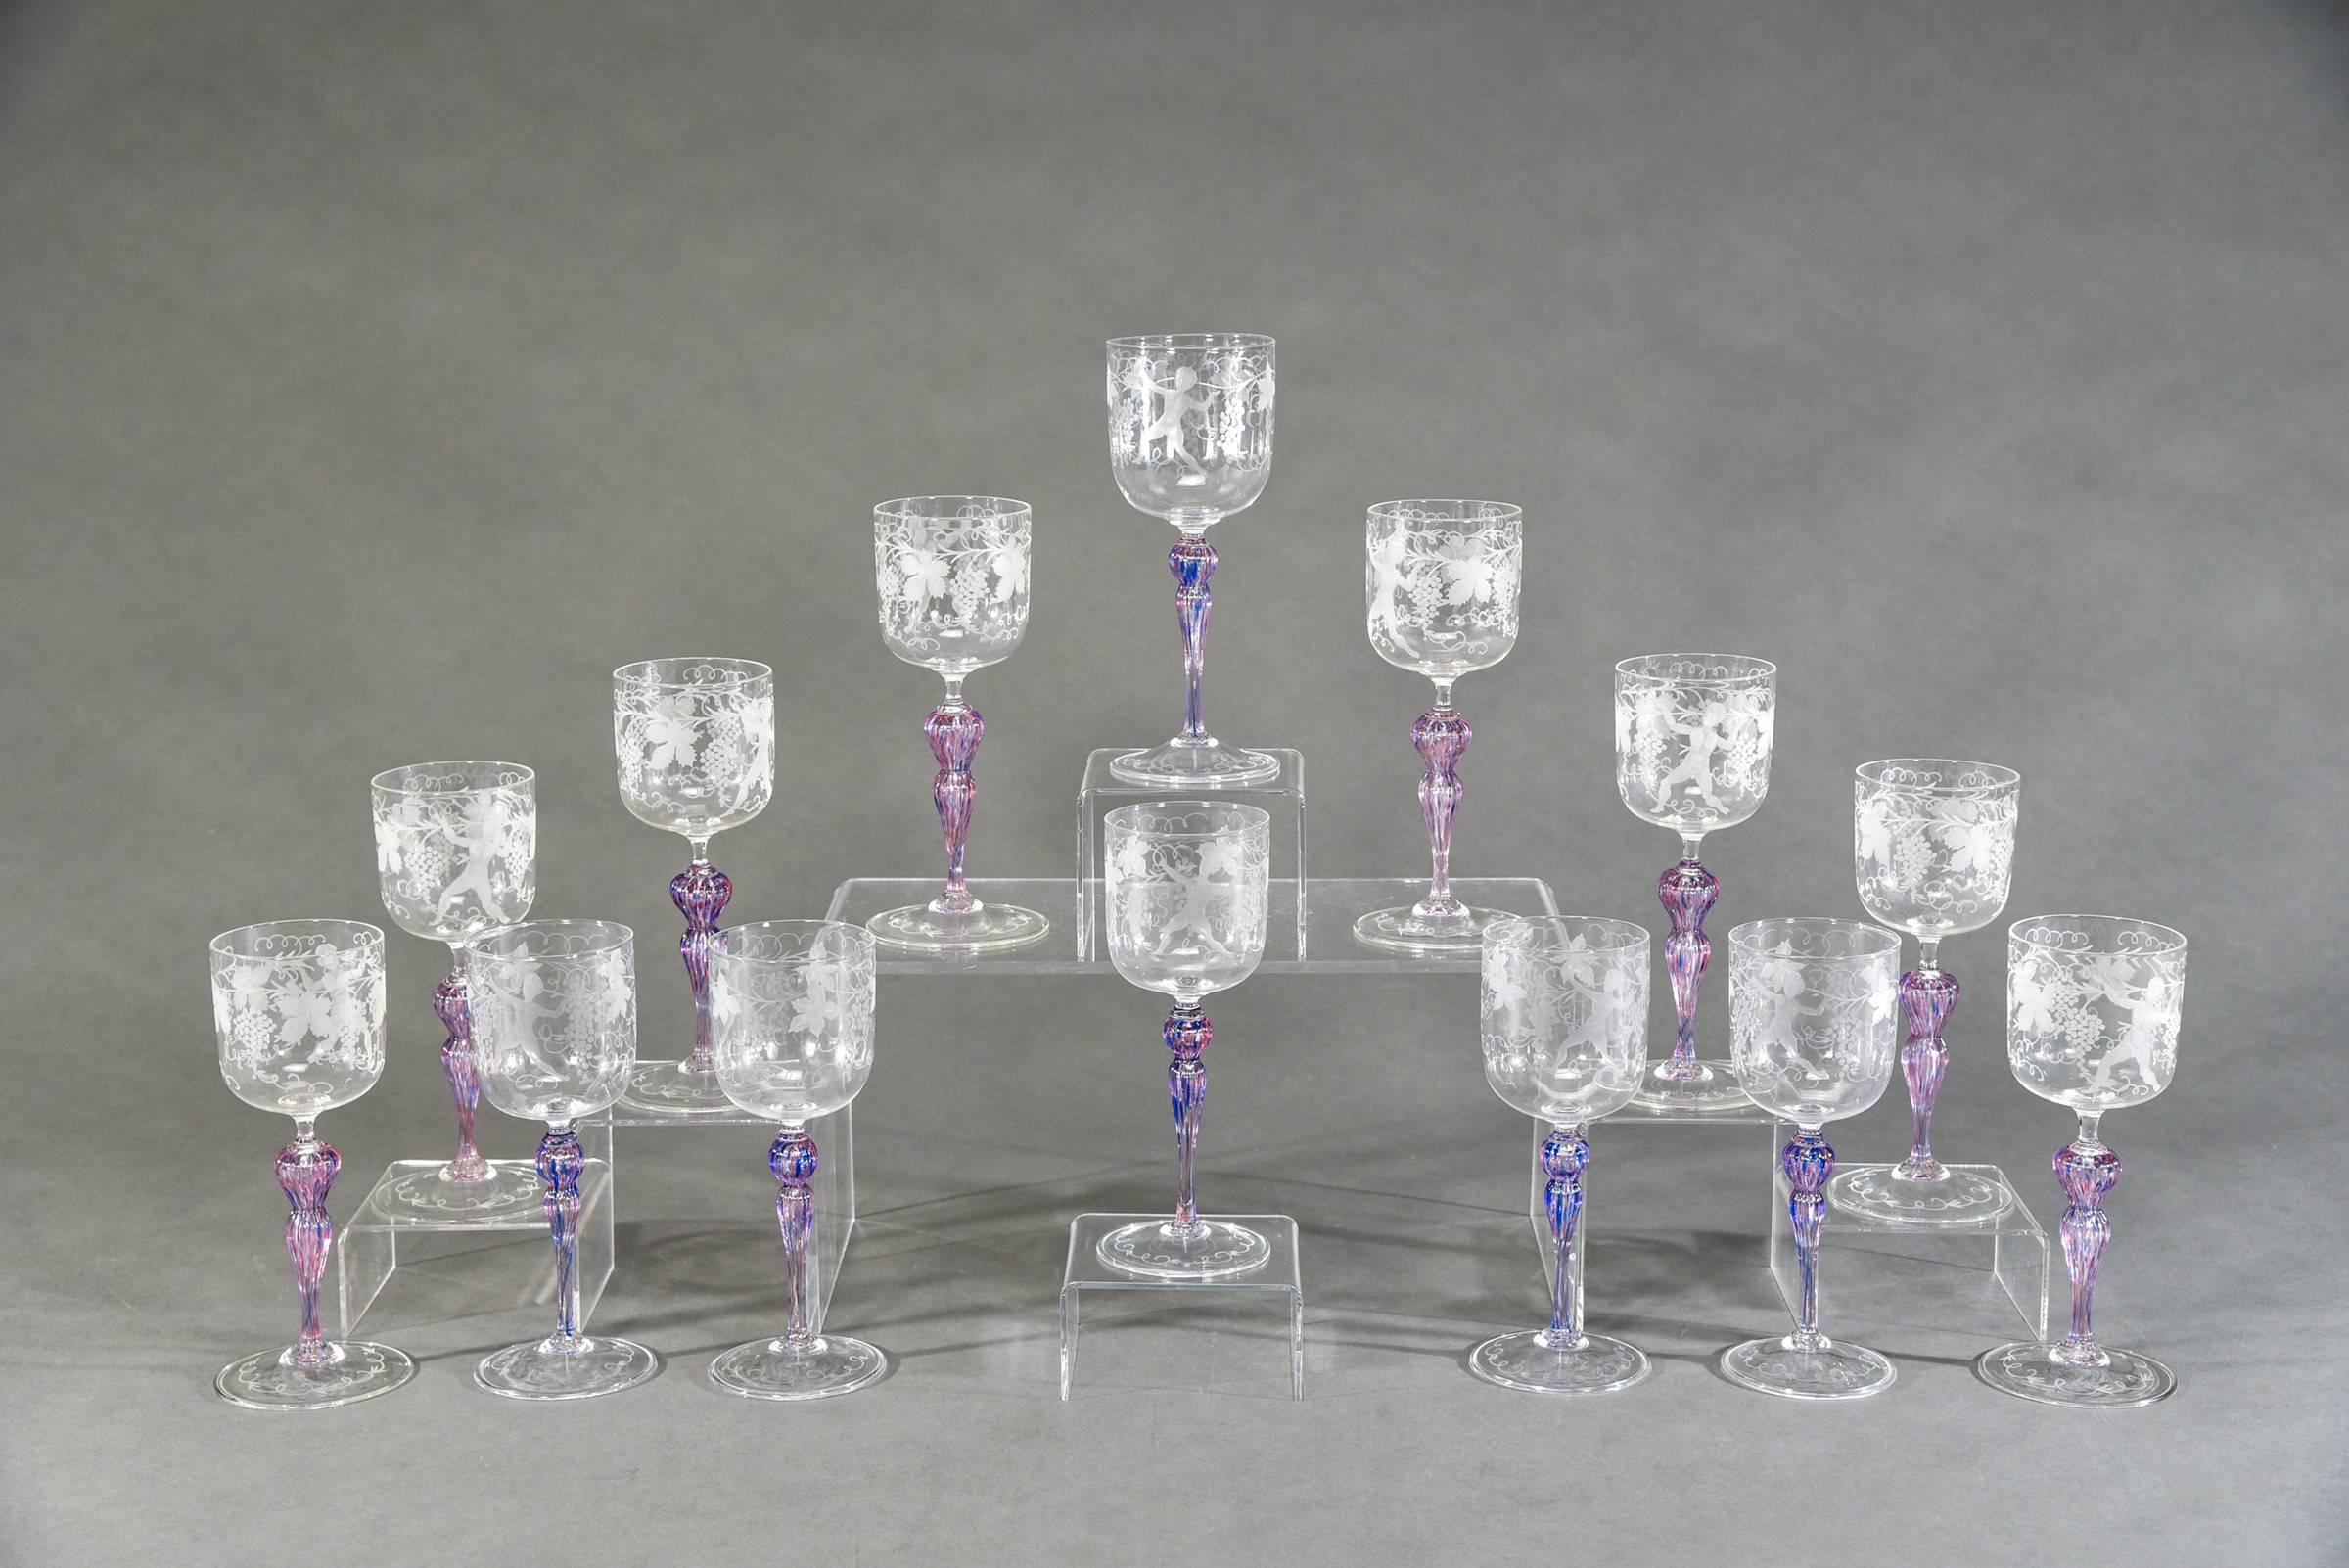 This is a set of 14 handblown goblets made in Venice, featuring a combination of a clear bowl with engraved decoration sitting on top of contrasting amethyst stems. What makes these so impressive is the variation in color due to the combination of